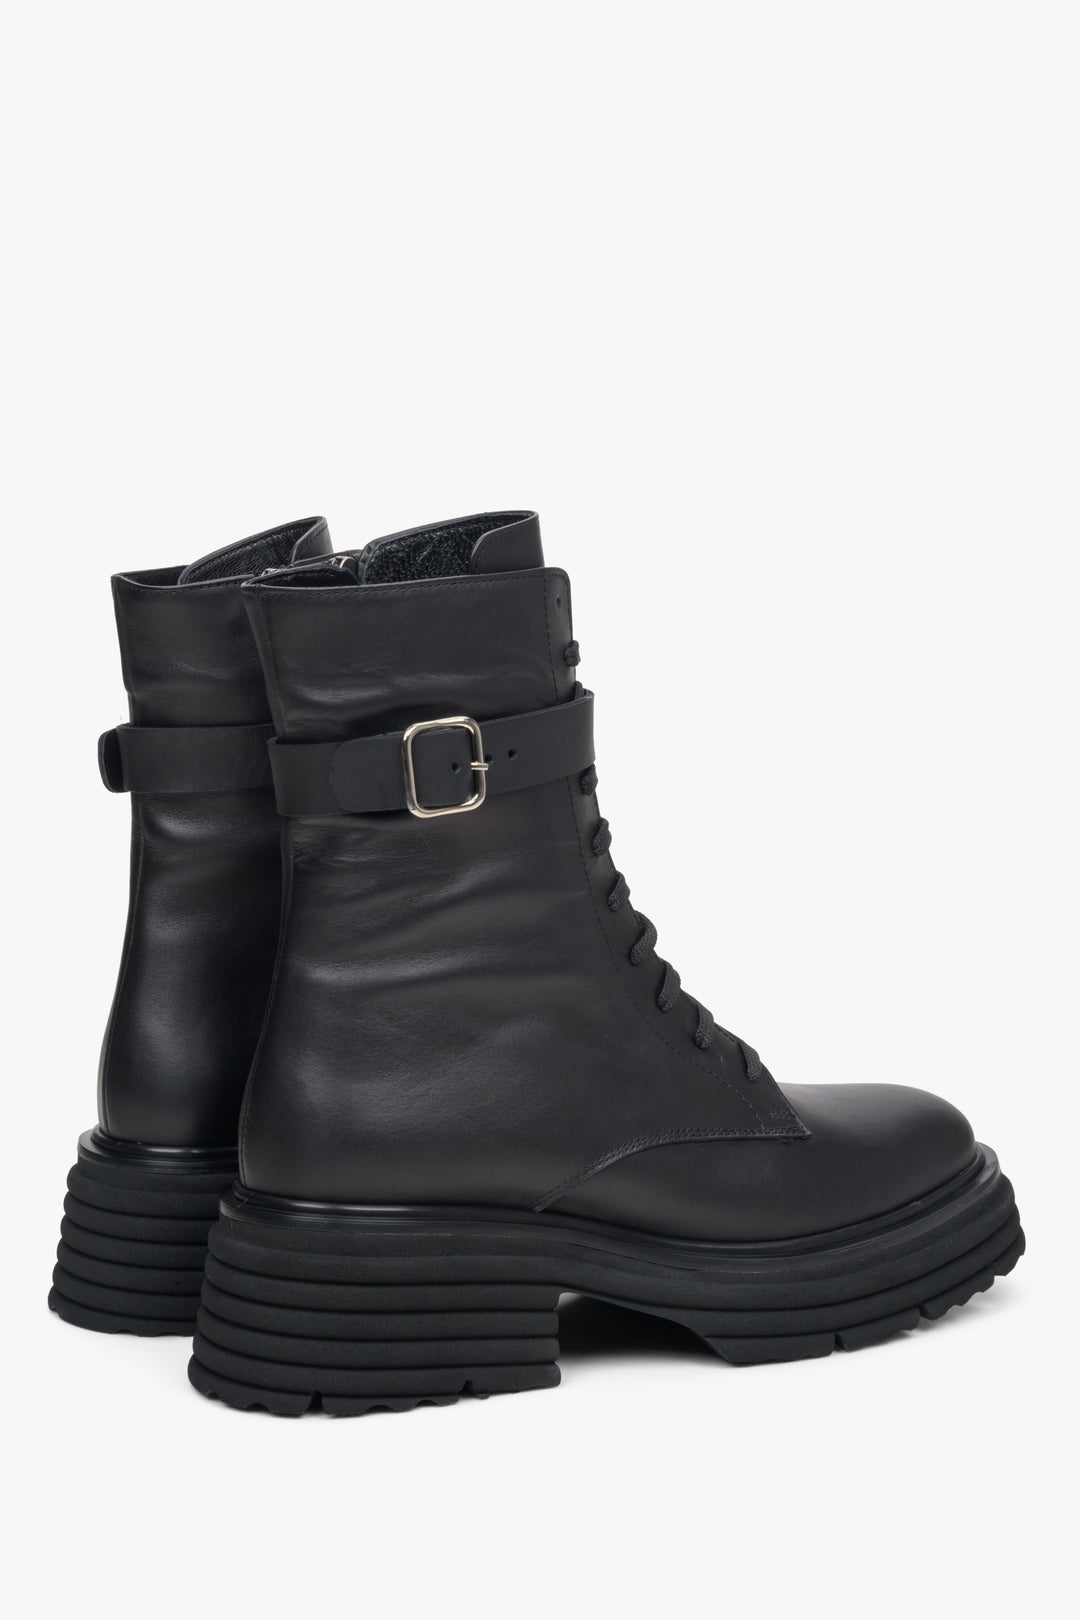 Women's black leather boots by Estro - close-up on the side line of the boot.